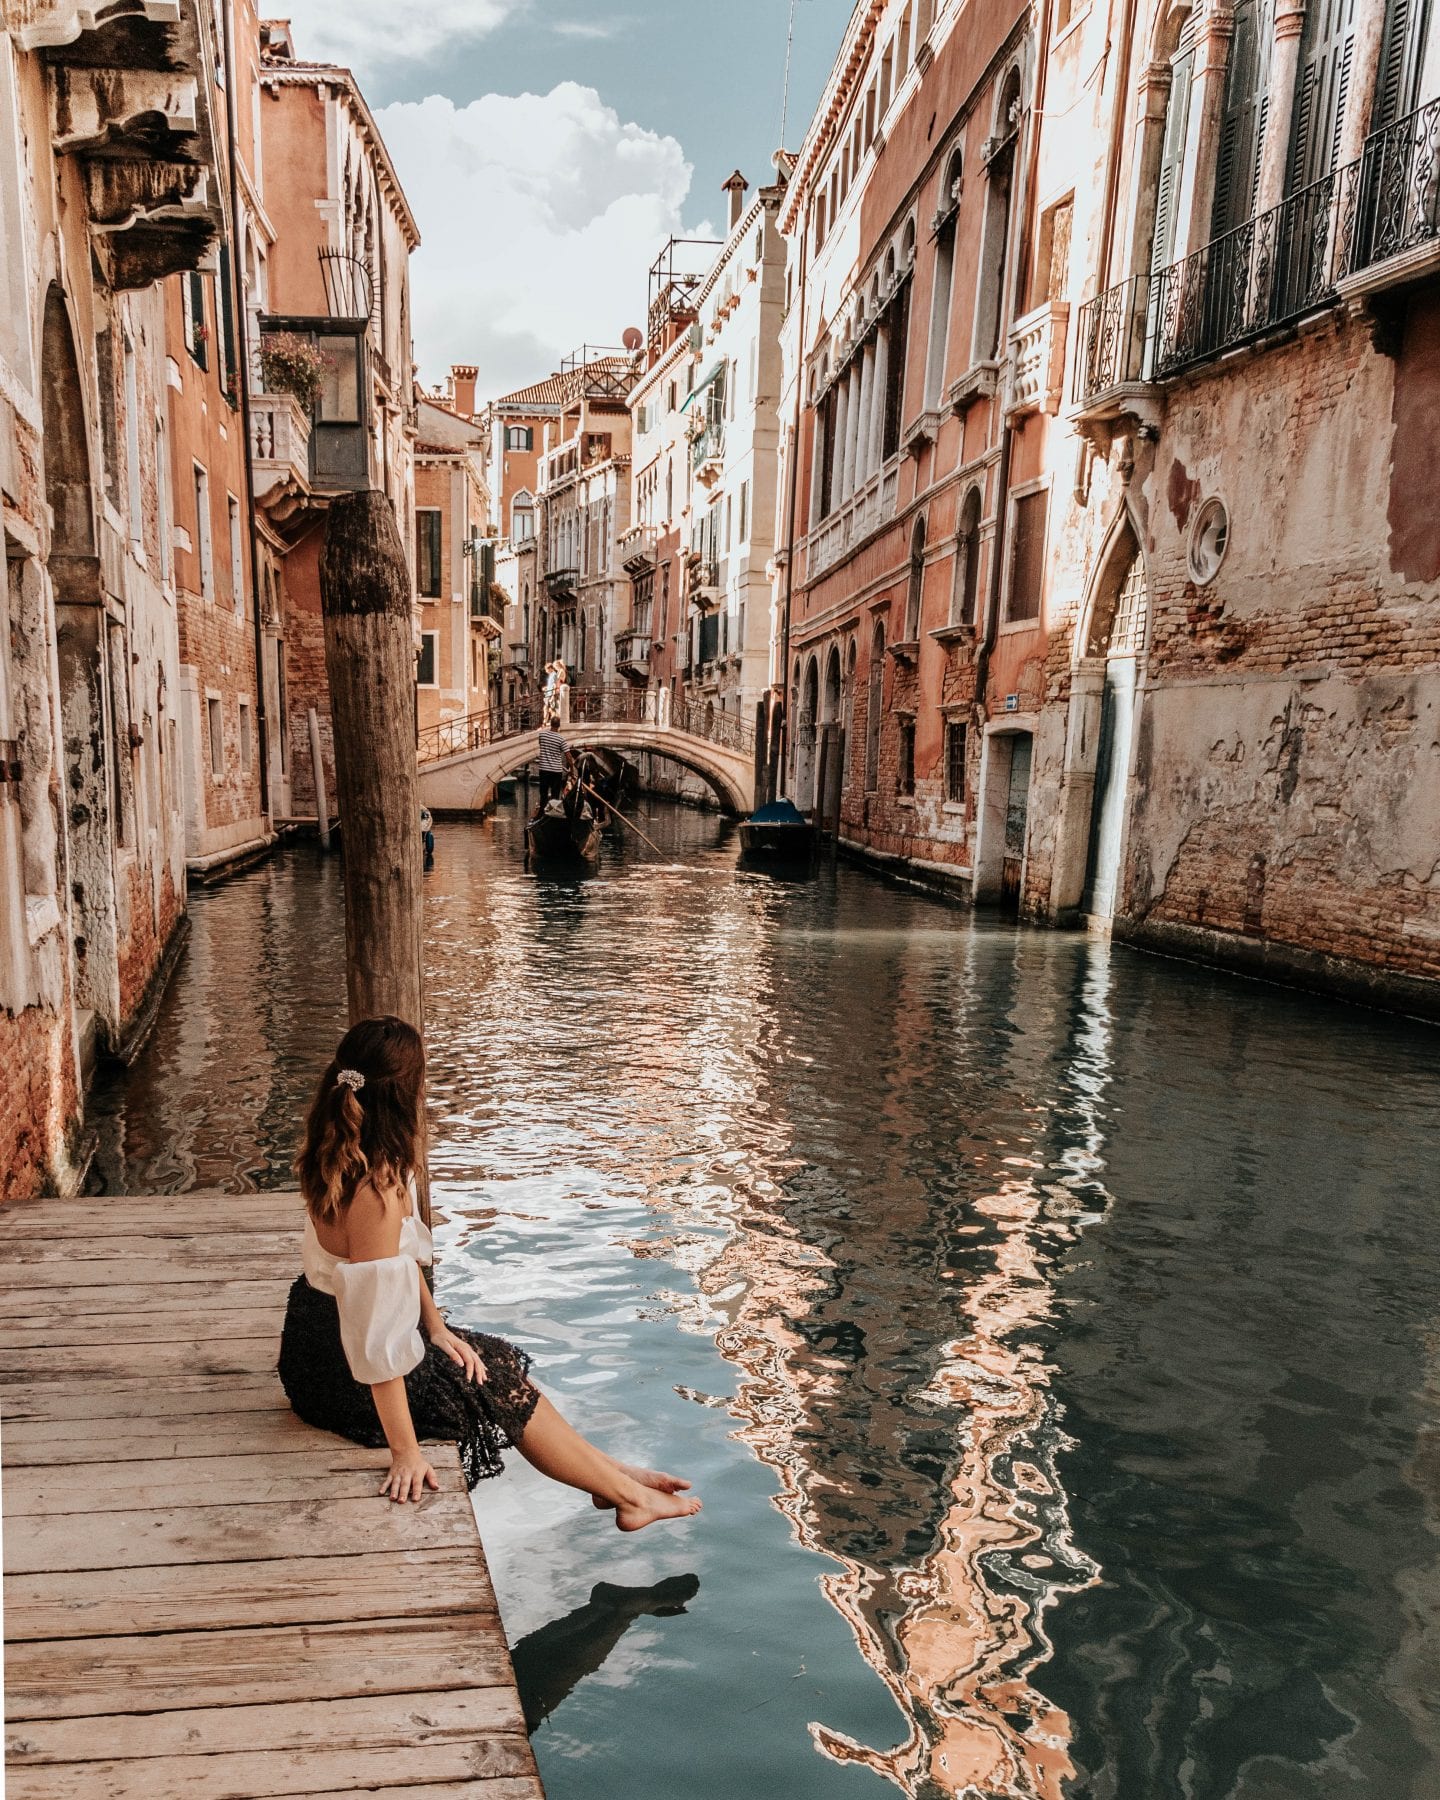 The Best Instagrammable Places in Venice - The Instagram Dock in Venice (Piscina S. Moise)